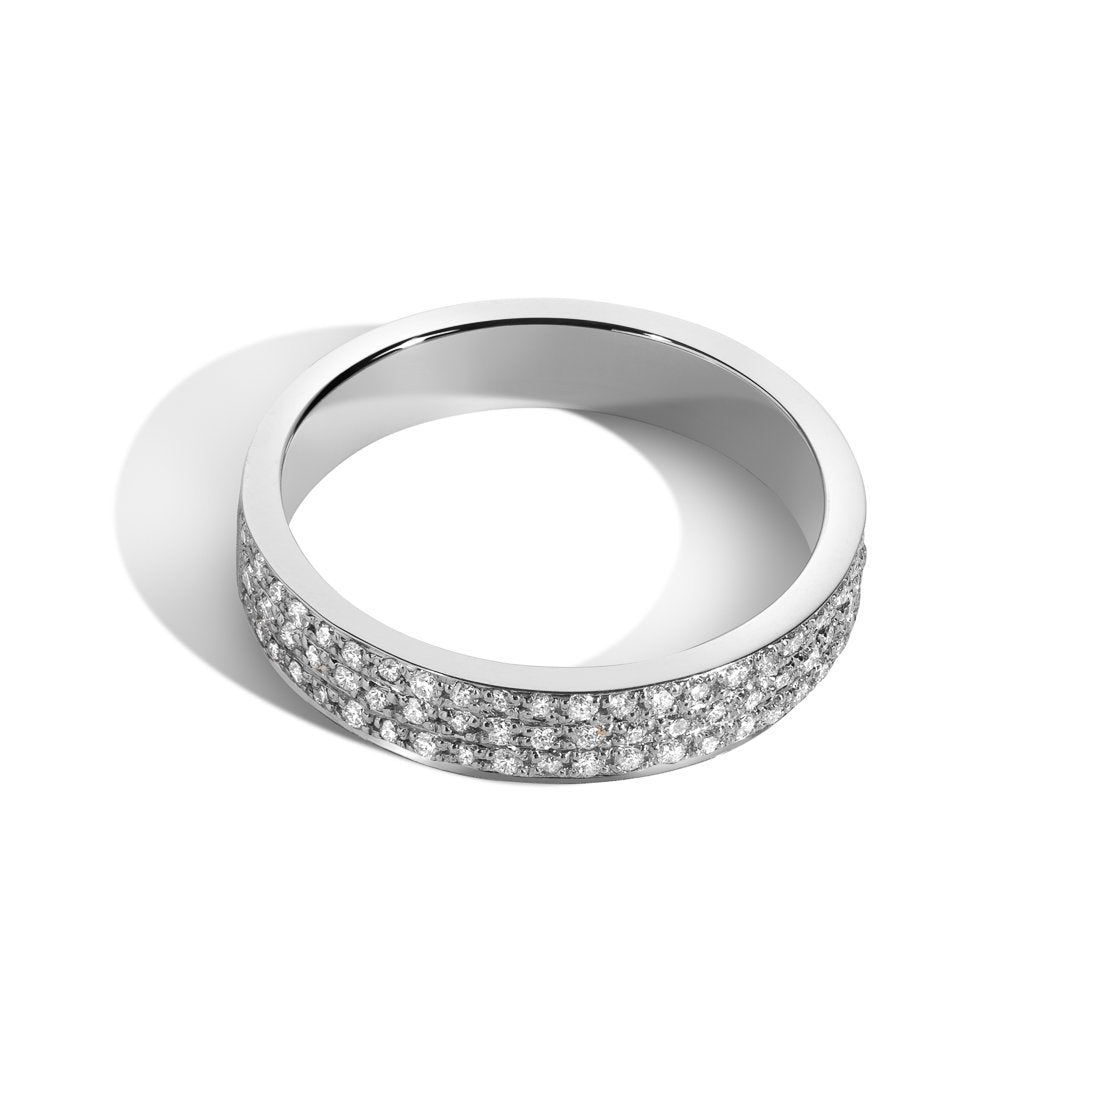 Shahla Karimi Jewelry Every Love Better Half Pave Band 14K White Gold or Platinum